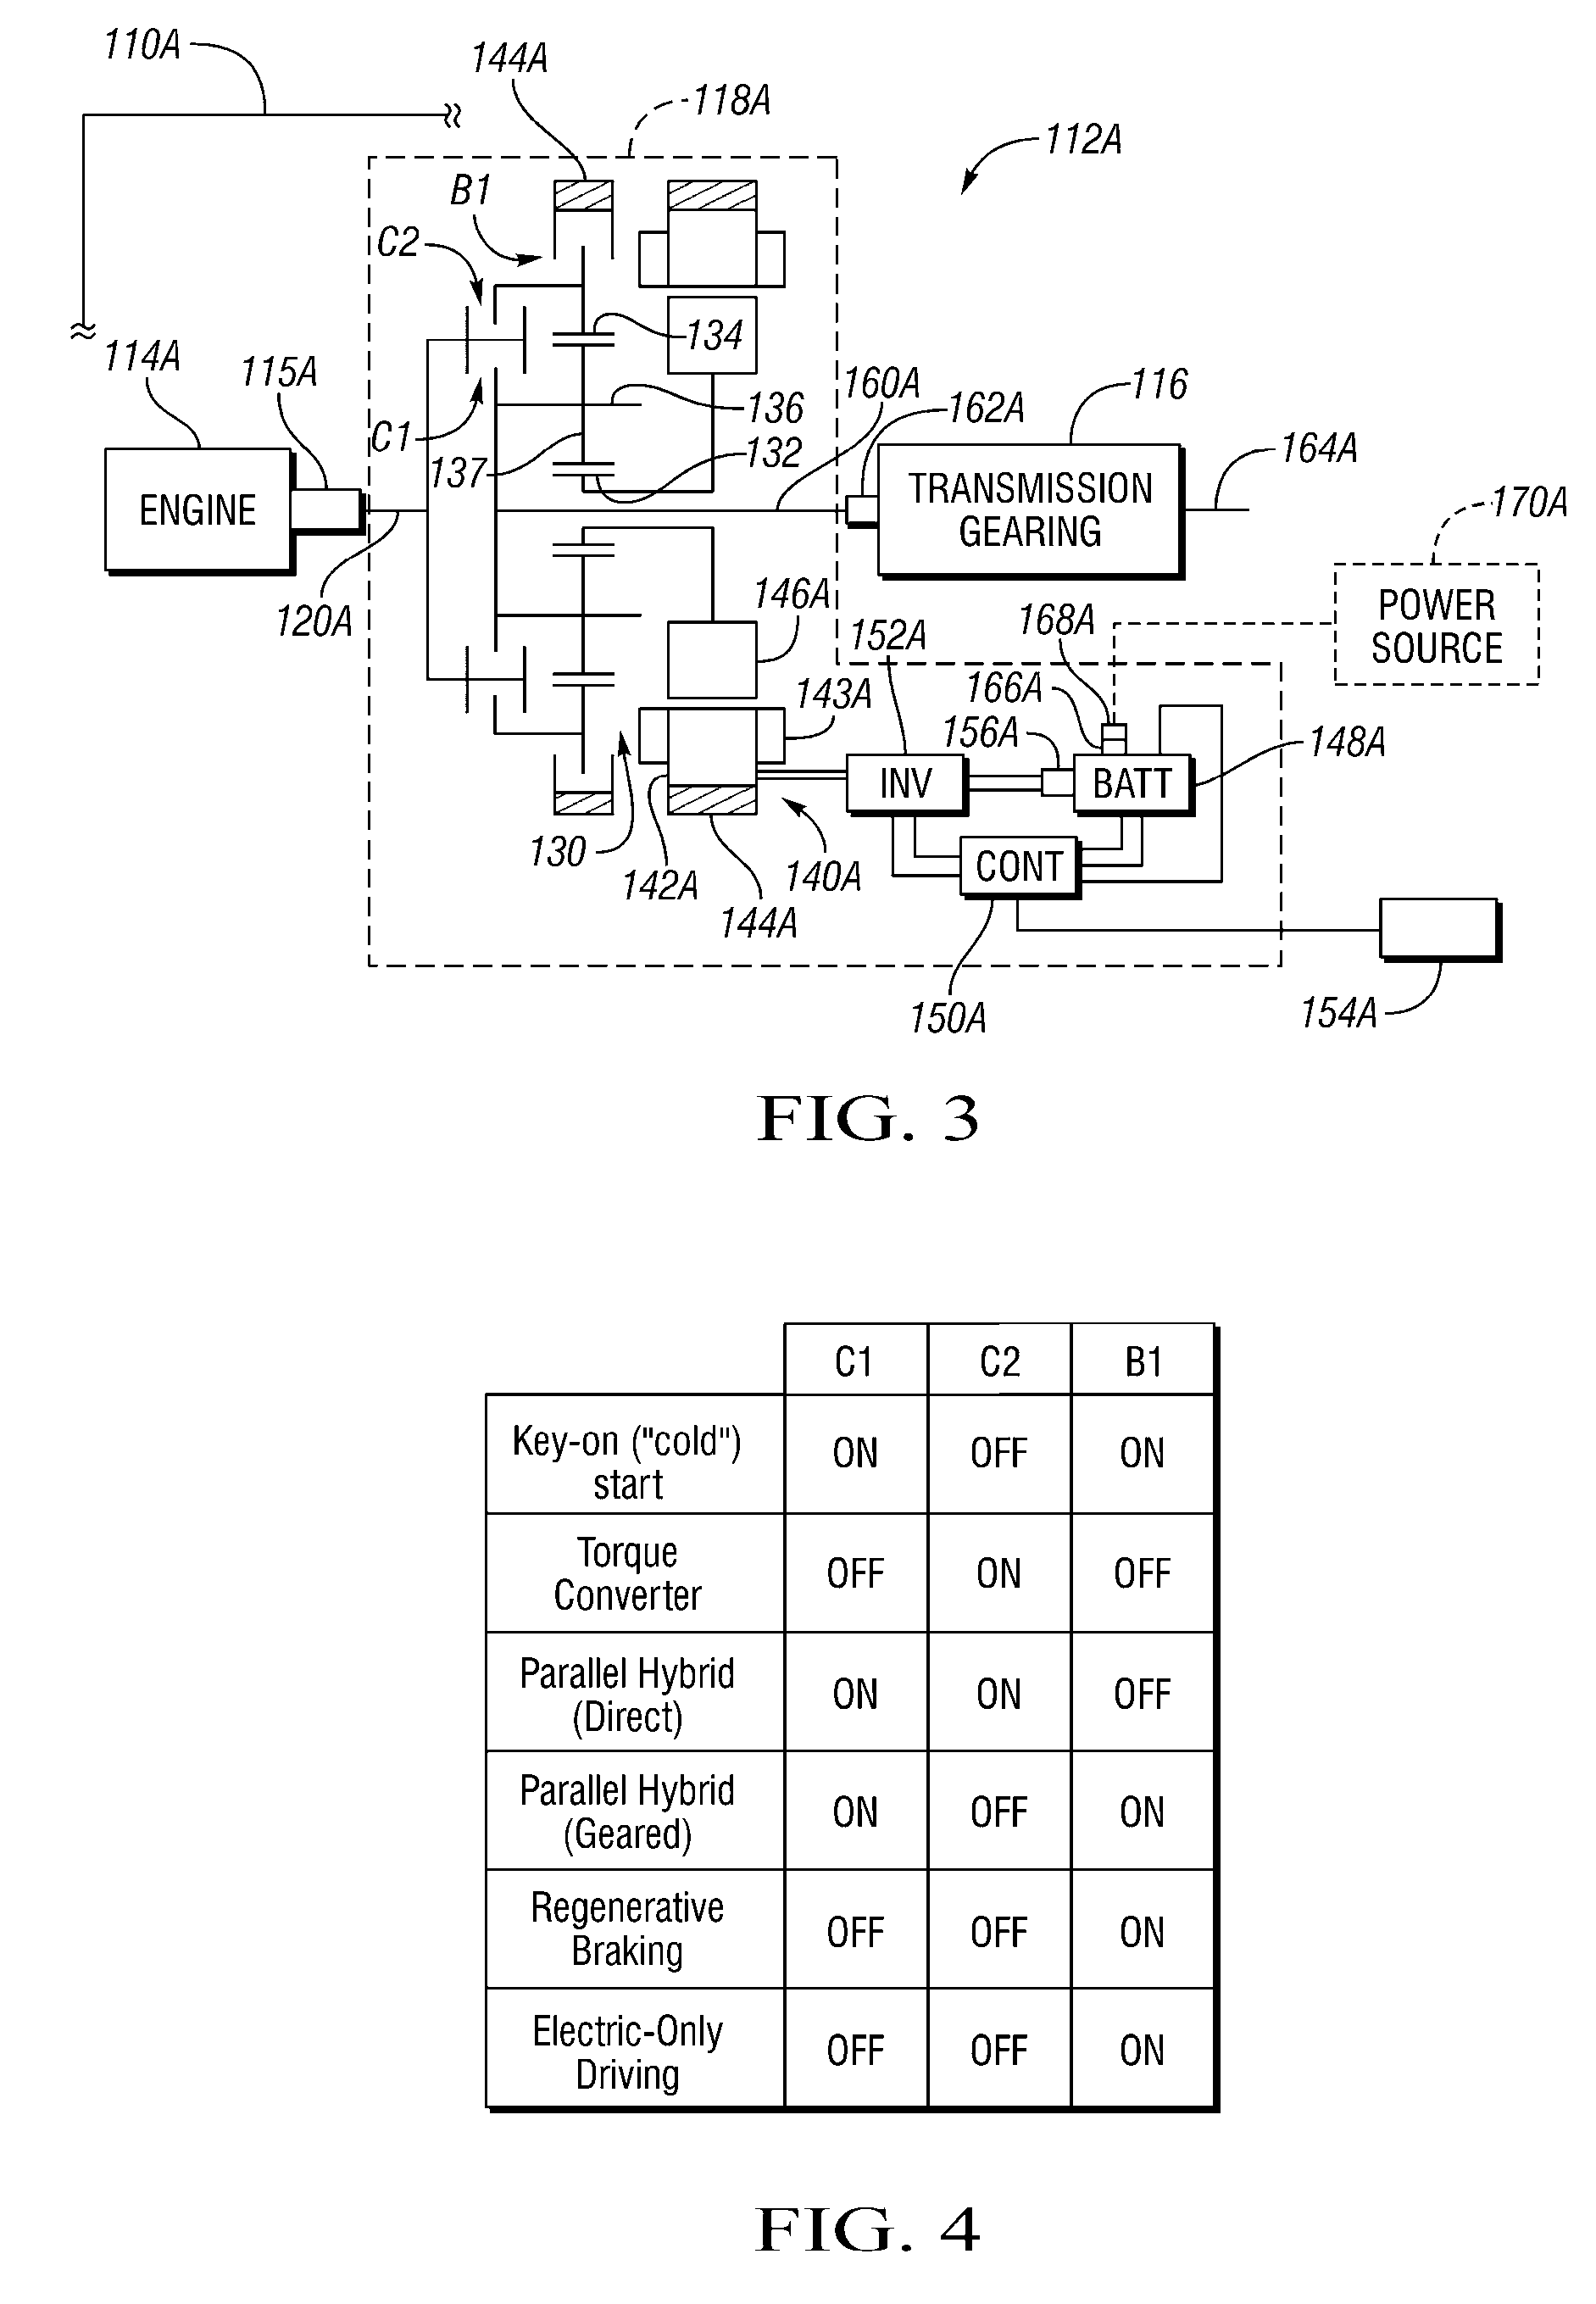 Electric Torque Converter for a Powertrain and Method of Operating a Vehicle